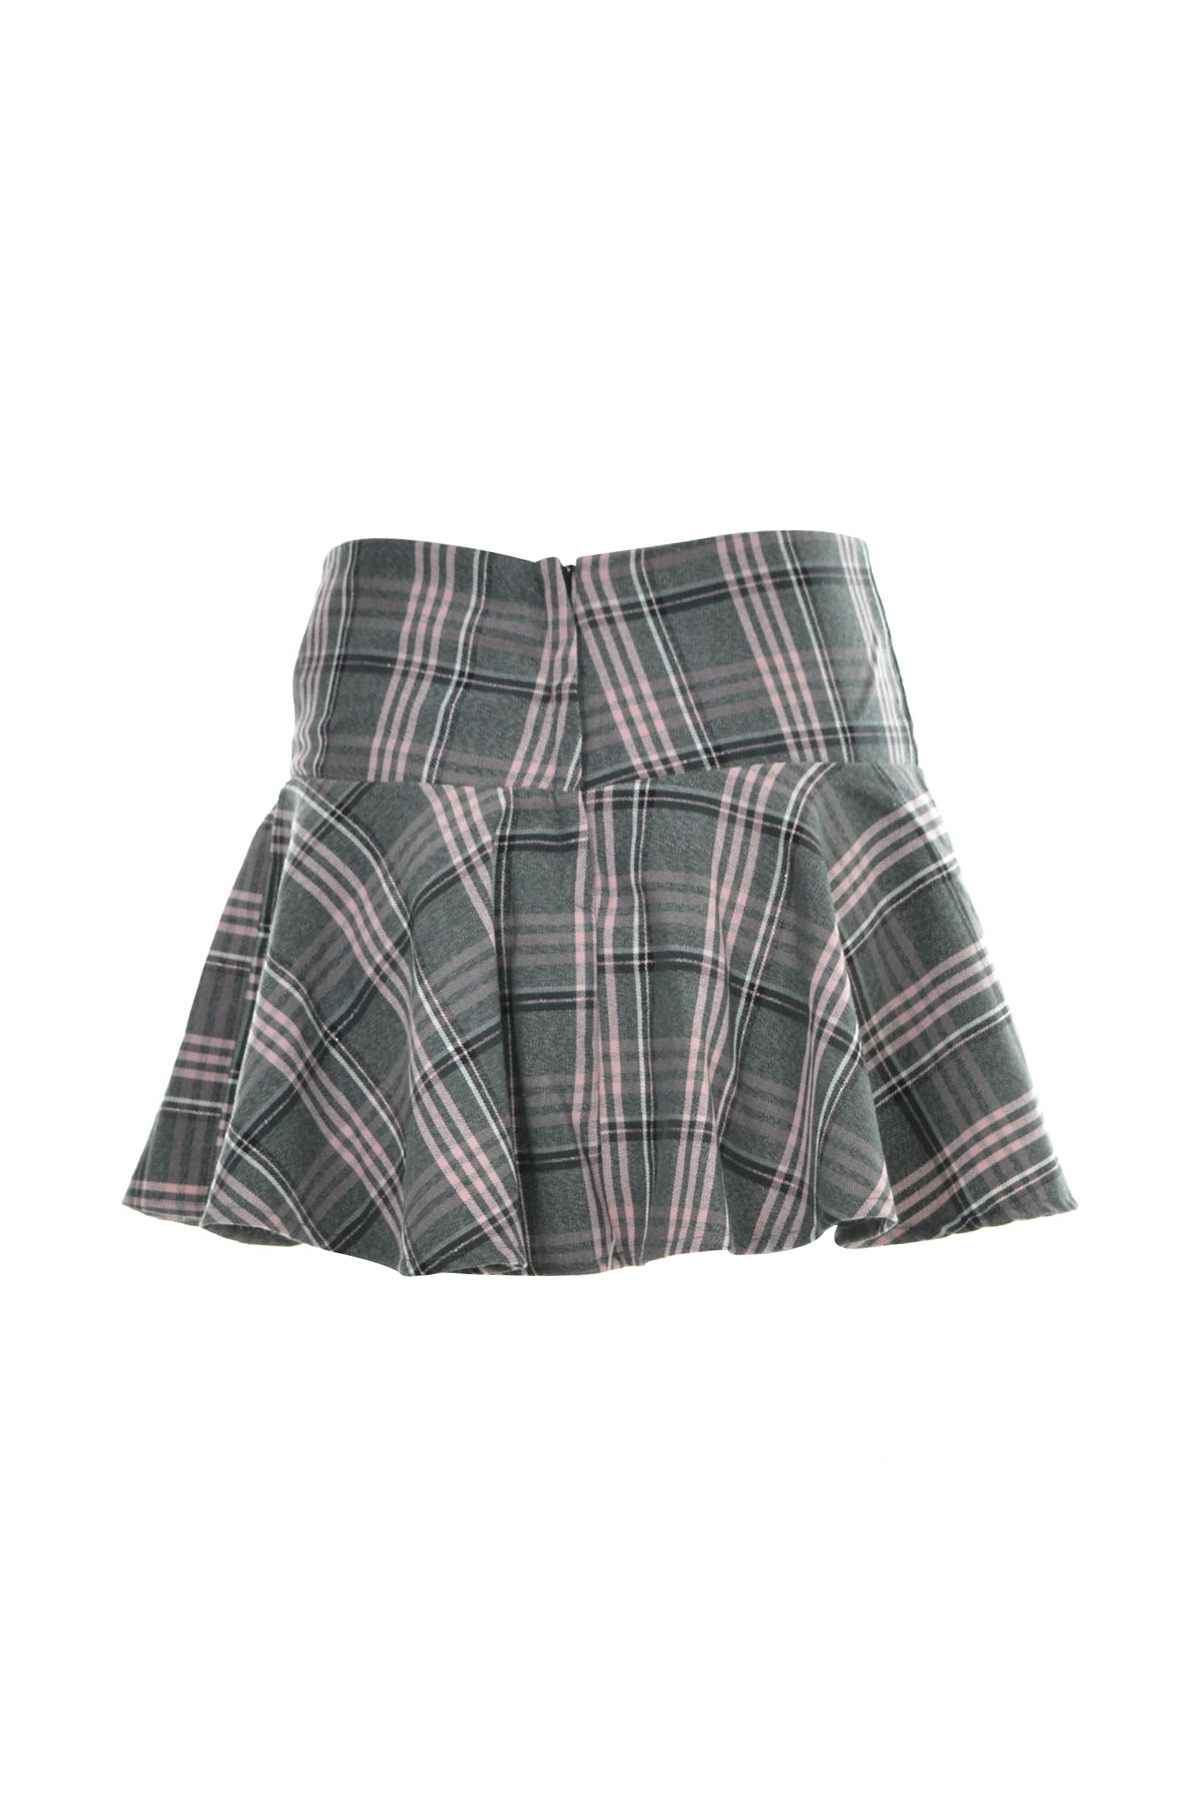 Girls' skirts - Here There - 1